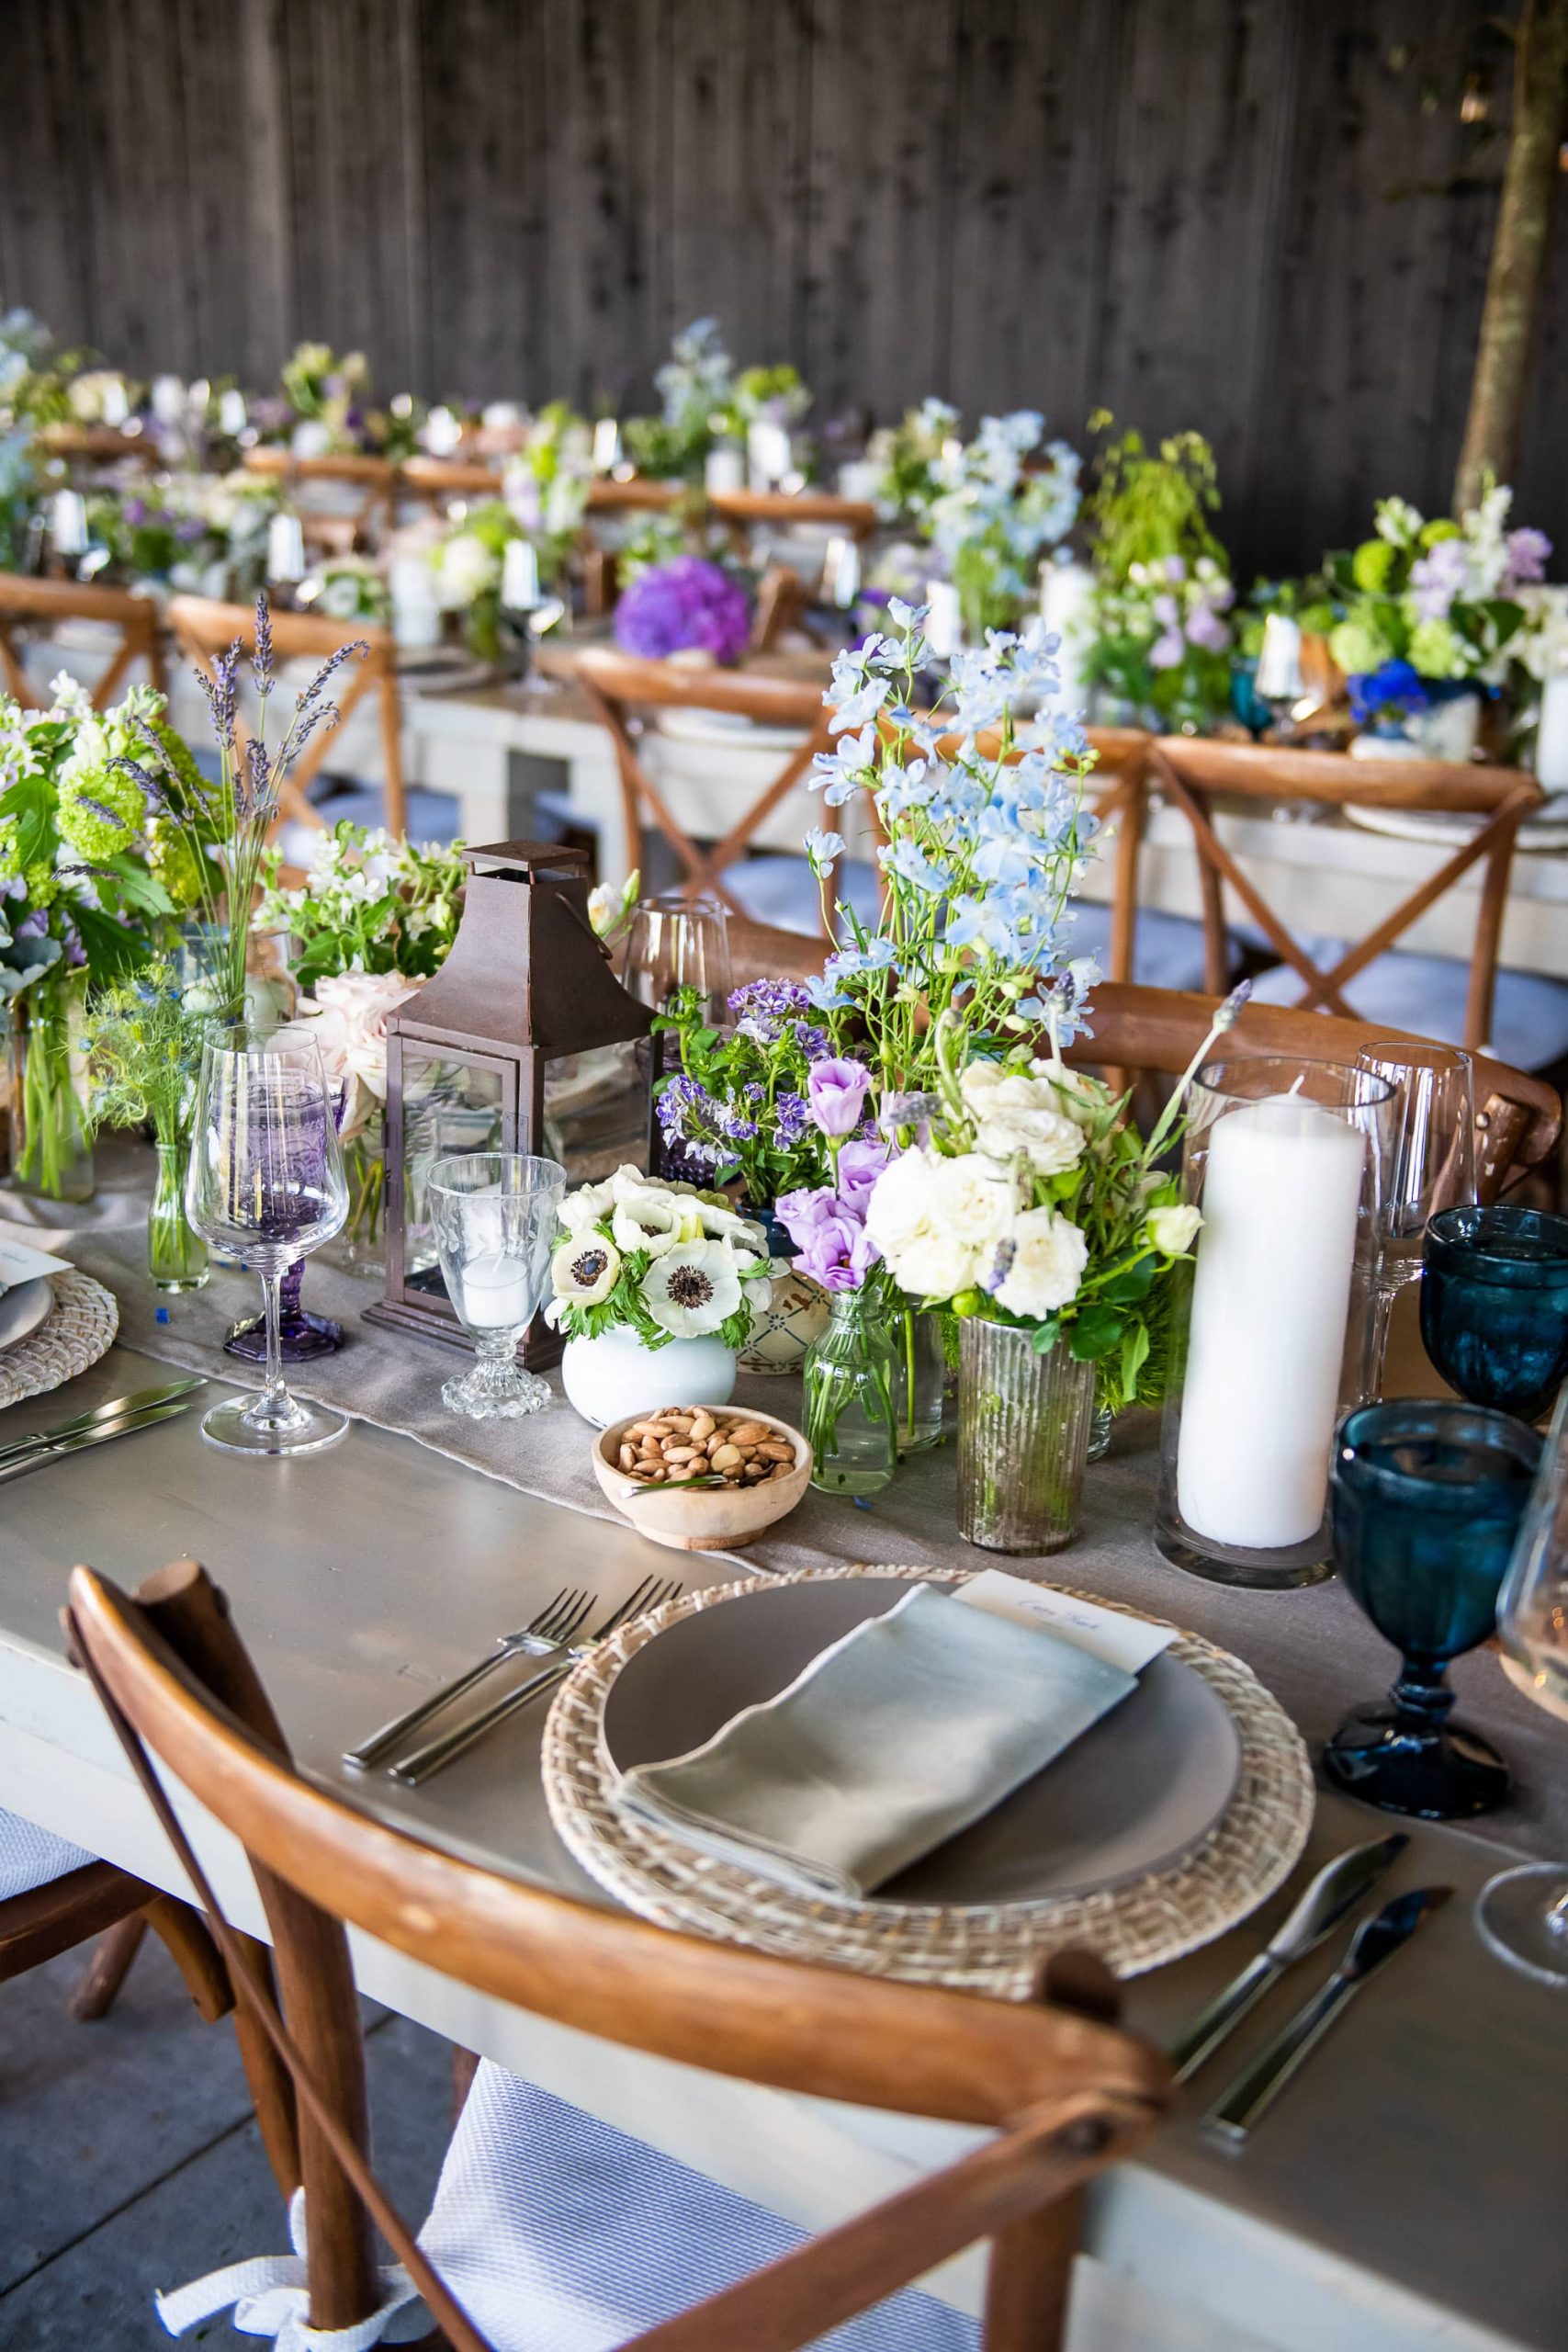 Table and floral decor at this Hamptons wedding weekend held at The Parrish Museum | Photo by Roey Yohai Studio